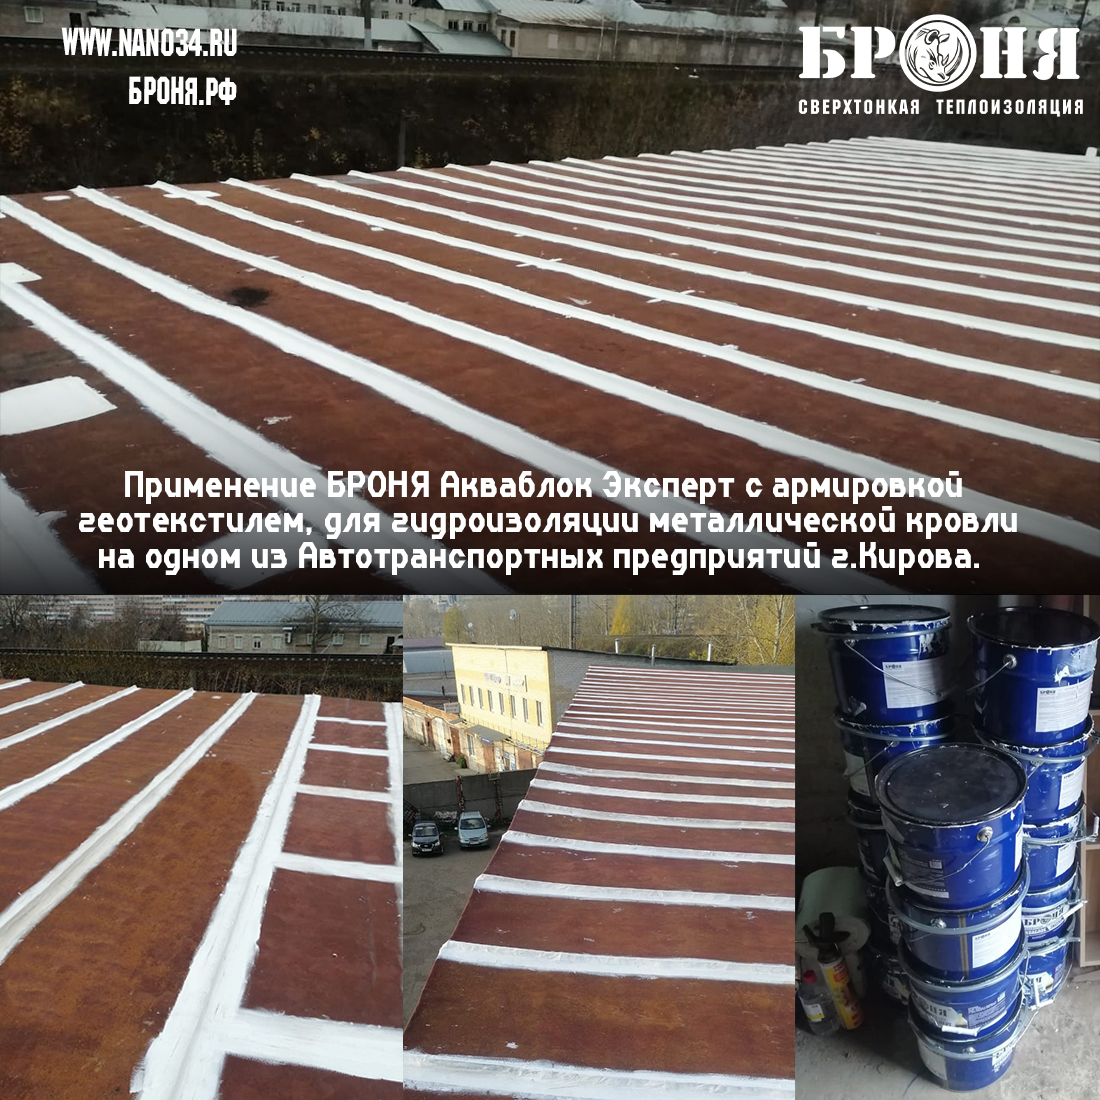 Application of Aquablock Expert with geotextile reinforcement for waterproofing of metal roofing at one of the motor transport enterprises in Kirov. (photos and videos)